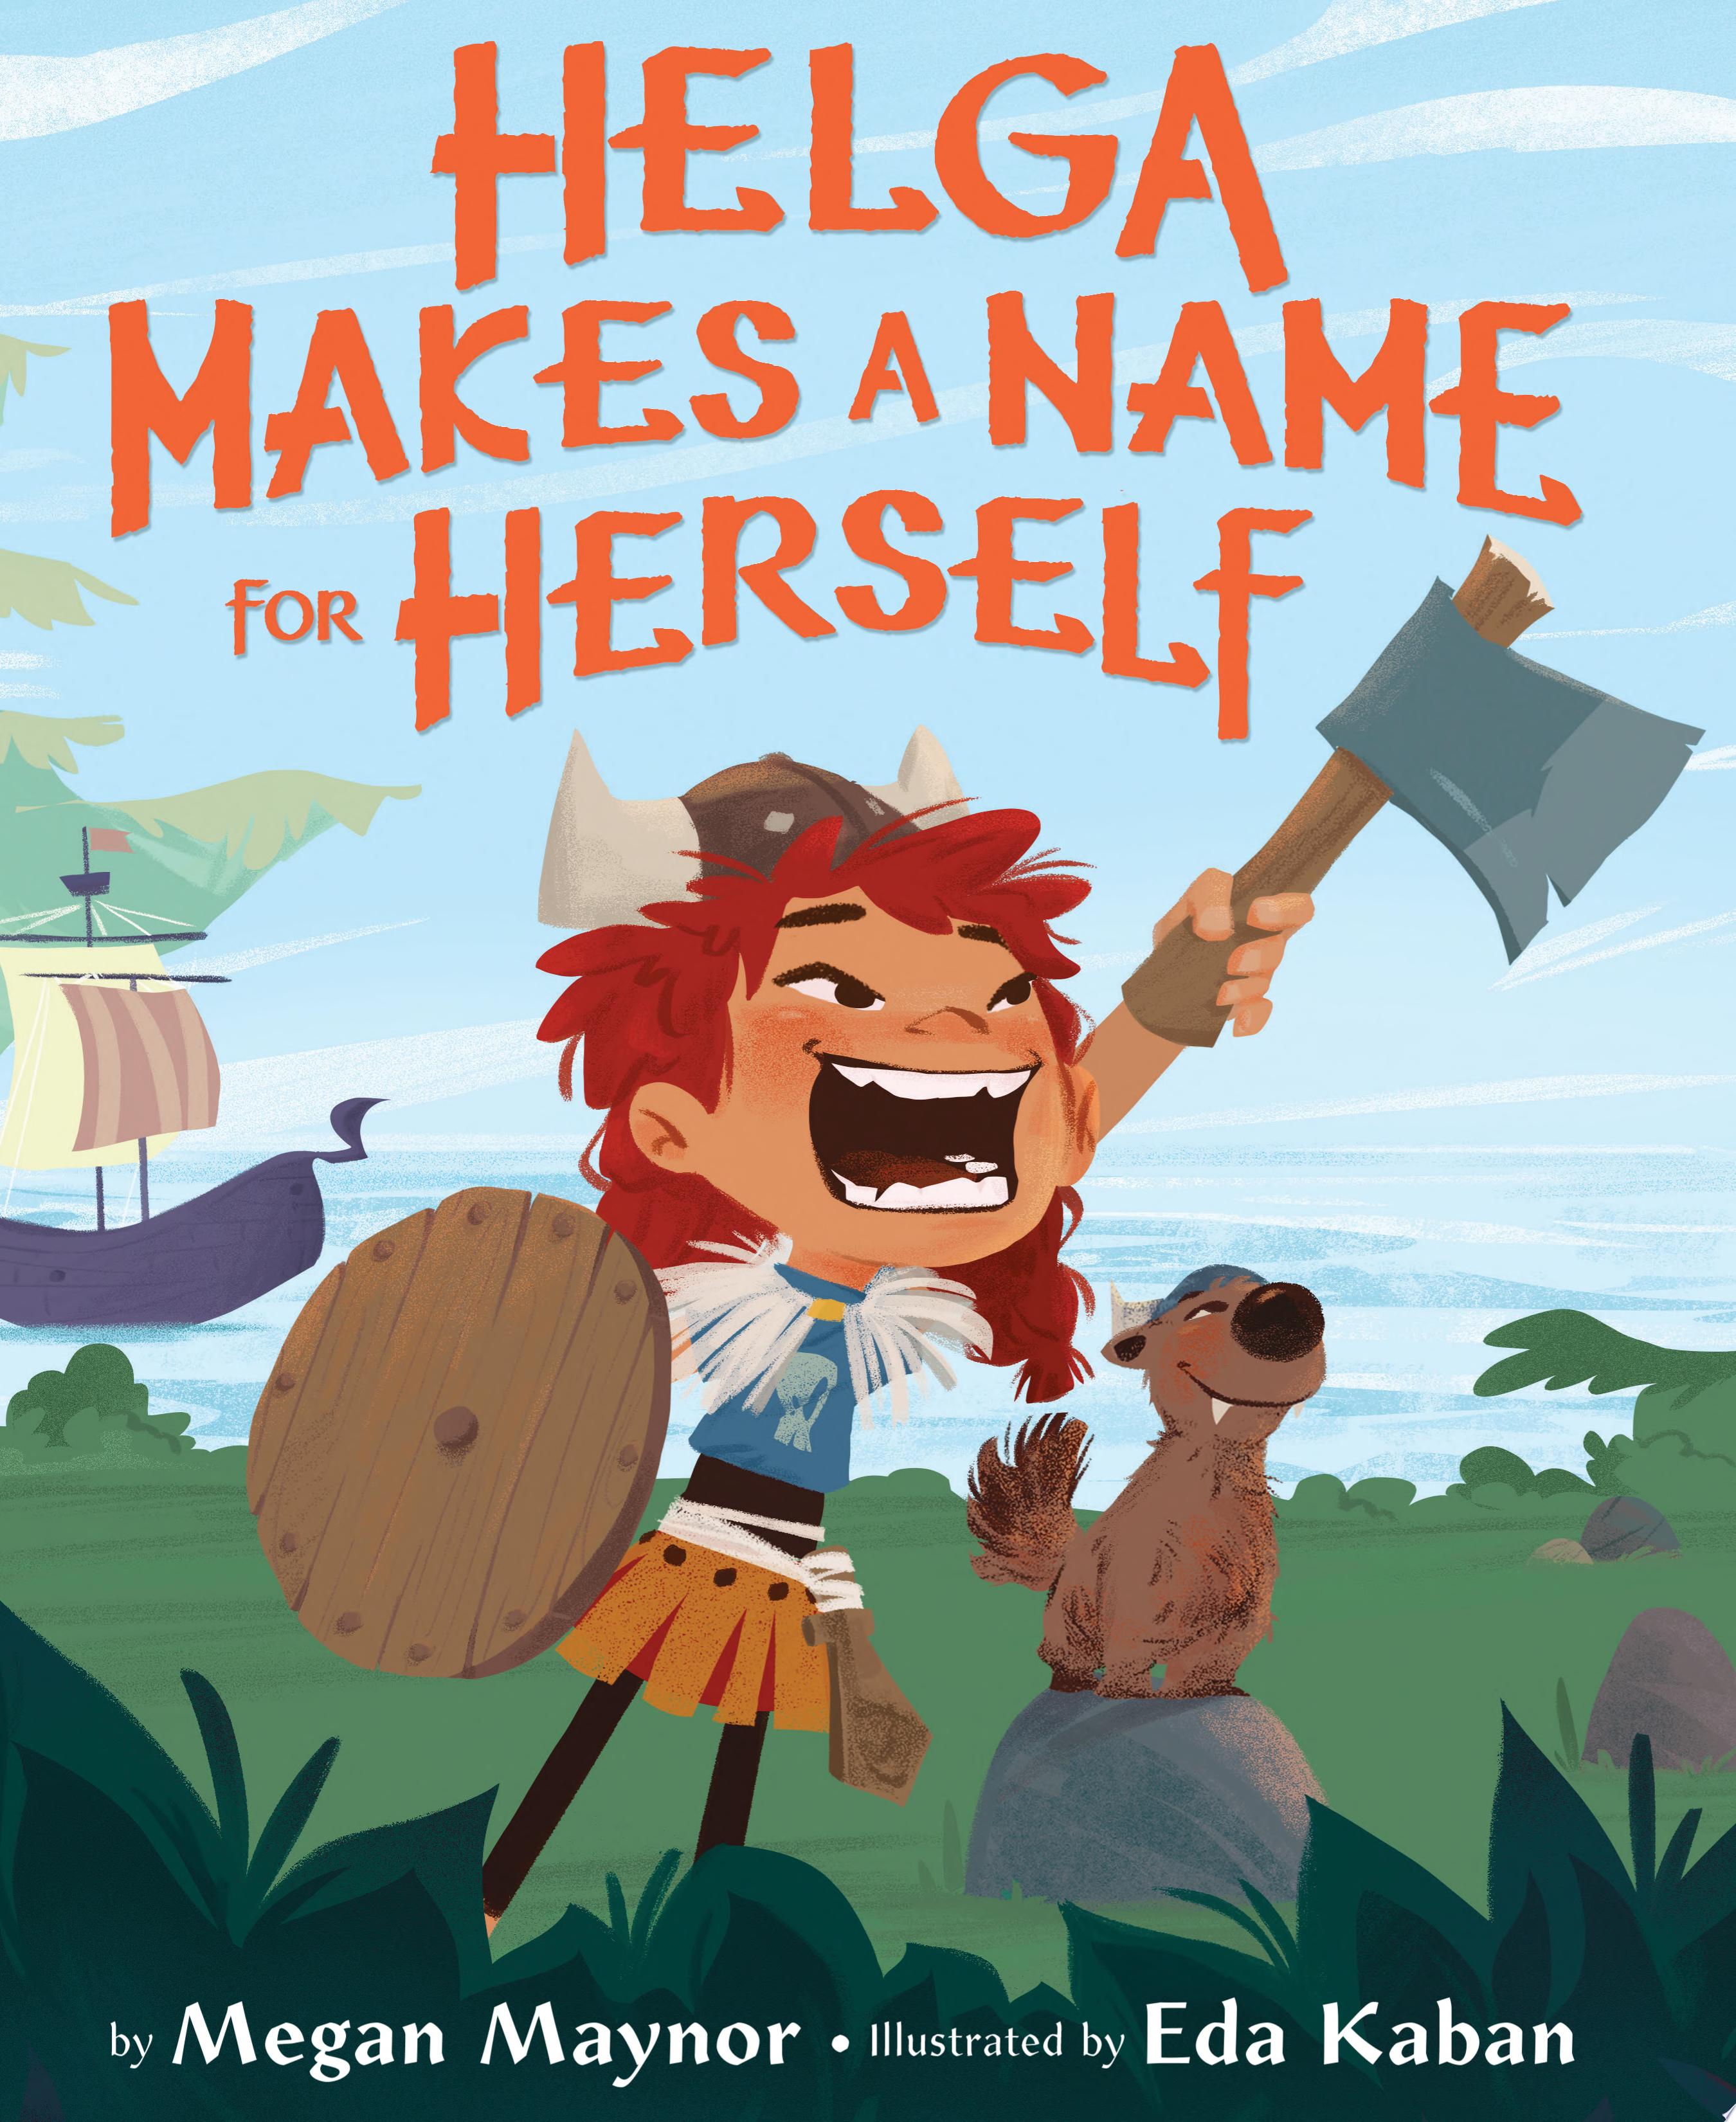 Image for "Helga Makes a Name for Herself"